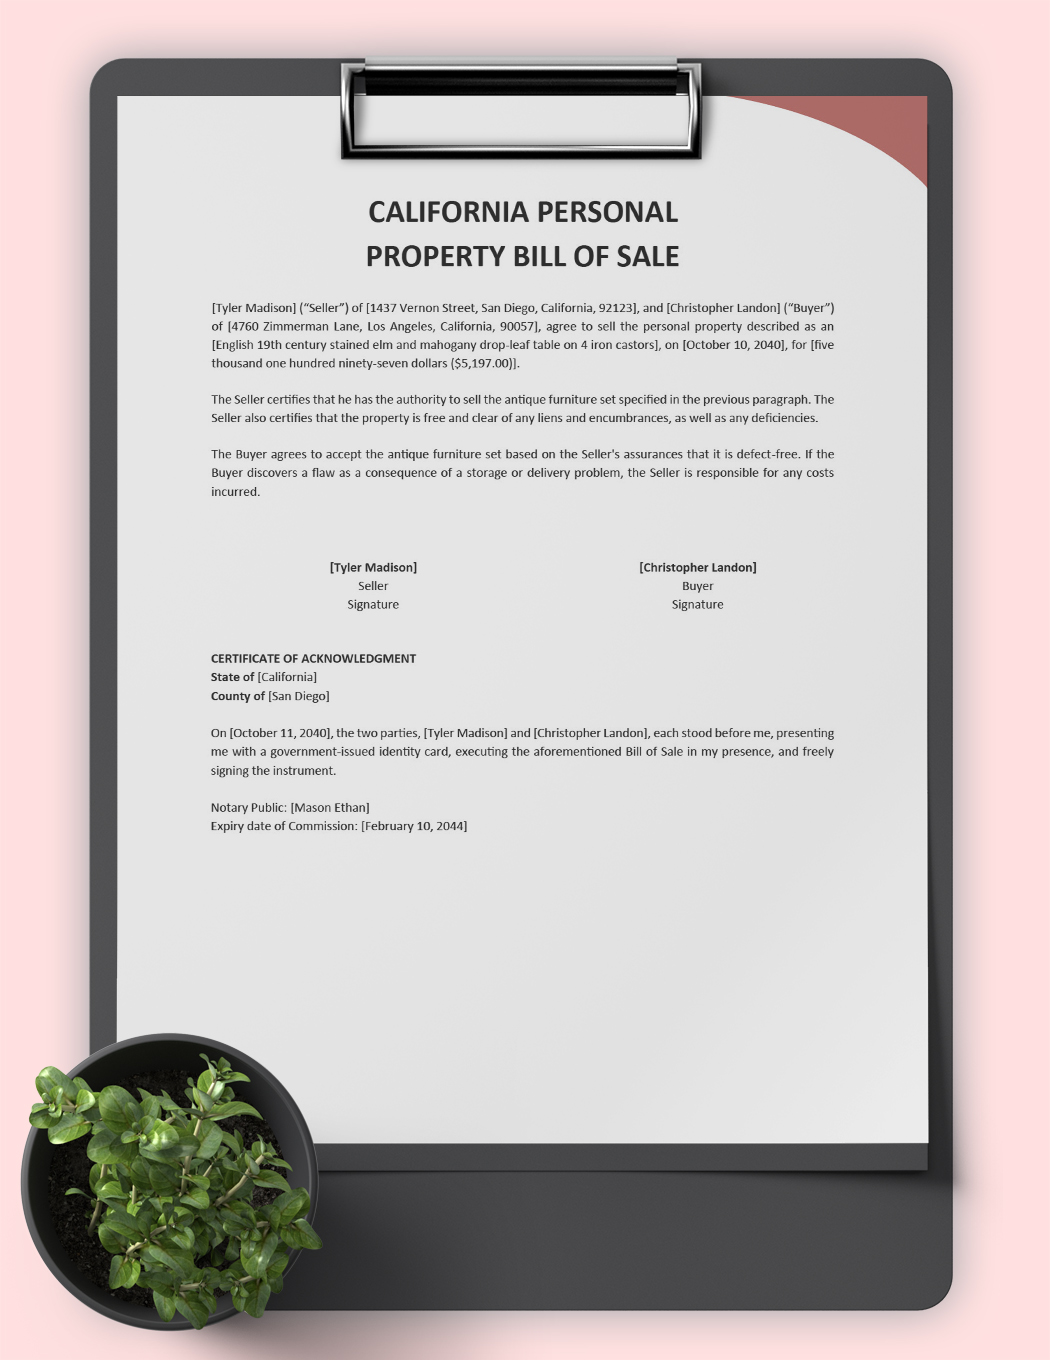 California Personal Property Bill of Sale Template